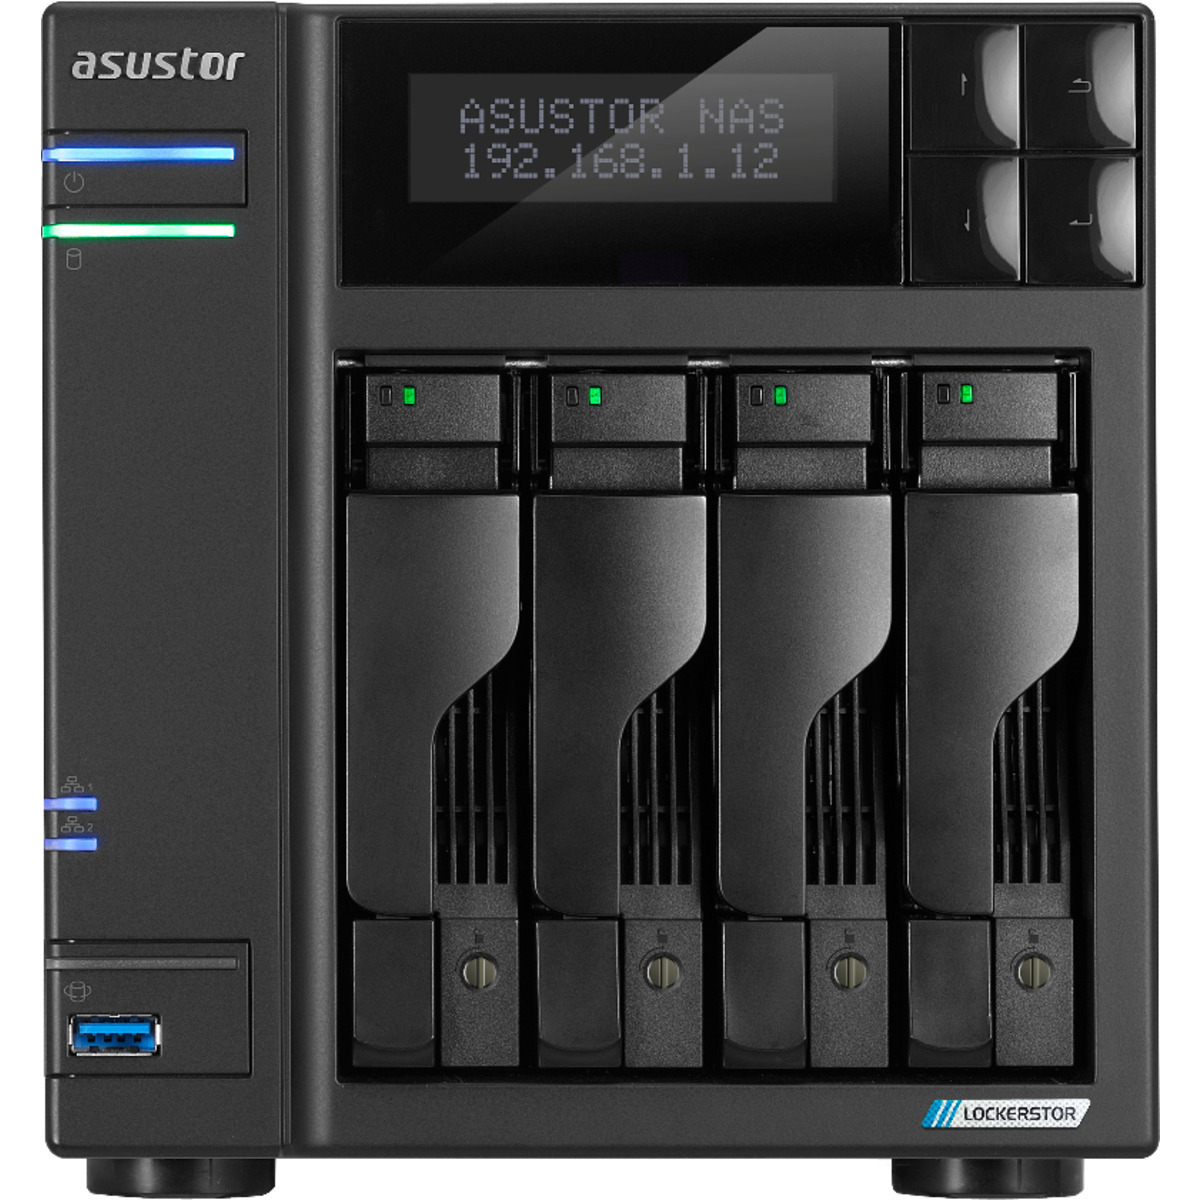 ASUSTOR LOCKERSTOR 4 Gen2 AS6704T 12tb 4-Bay Desktop Multimedia / Power User / Business NAS - Network Attached Storage Device 3x4tb Western Digital Red SA500 WDS400T1R0A 2.5 560/530MB/s SATA 6Gb/s SSD NAS Class Drives Installed - Burn-In Tested - FREE RAM UPGRADE LOCKERSTOR 4 Gen2 AS6704T